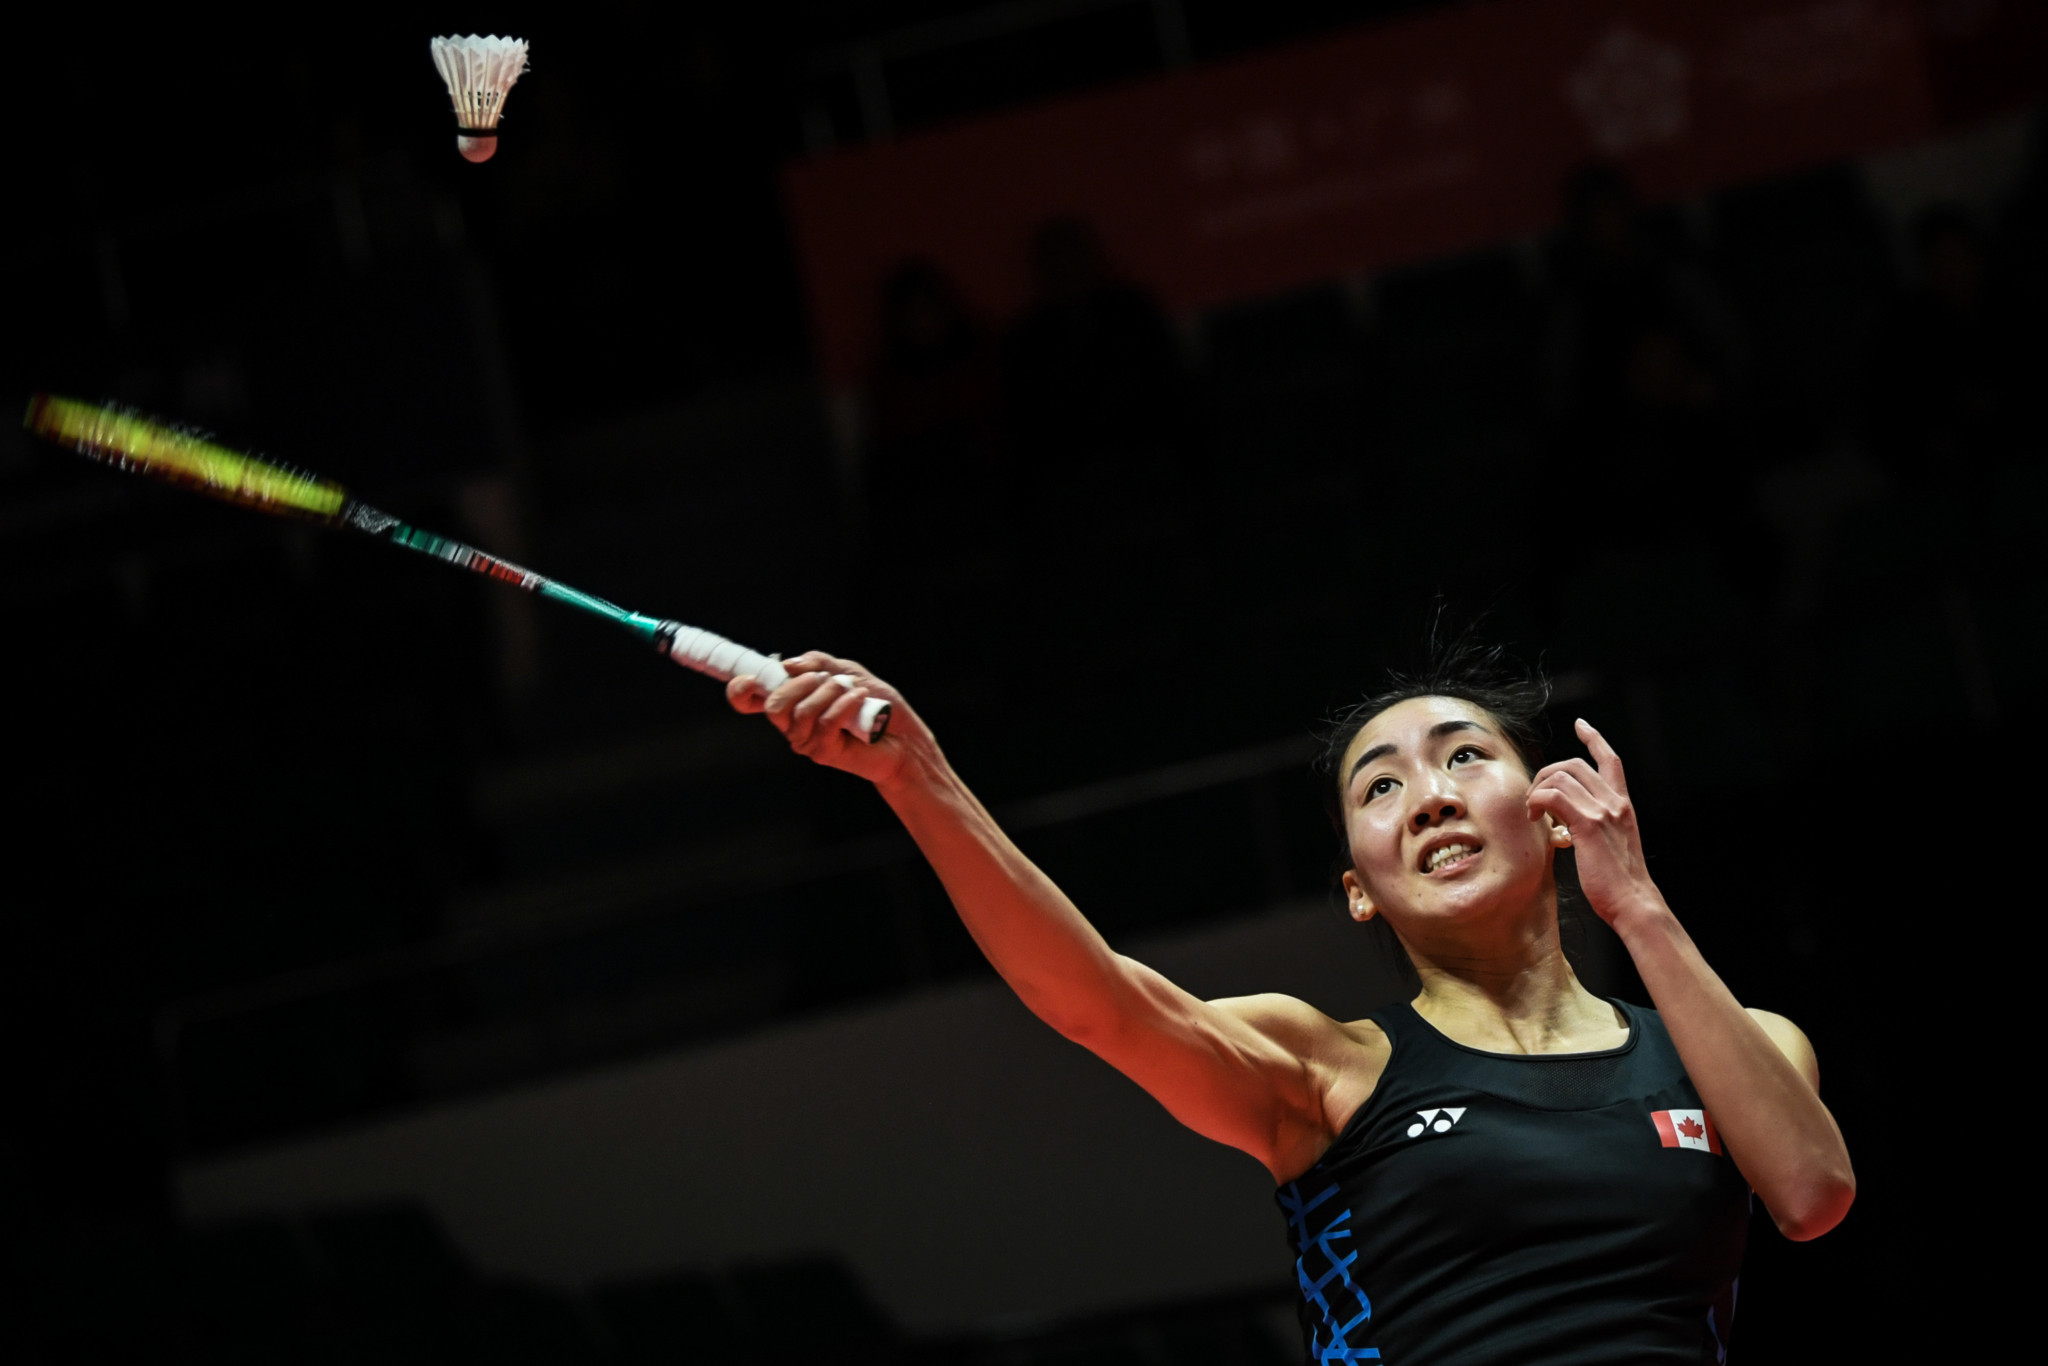 Top seed Michelle Li cruised into the quarter-finals of the women's singles at the BWF Canada Open ©Getty Images